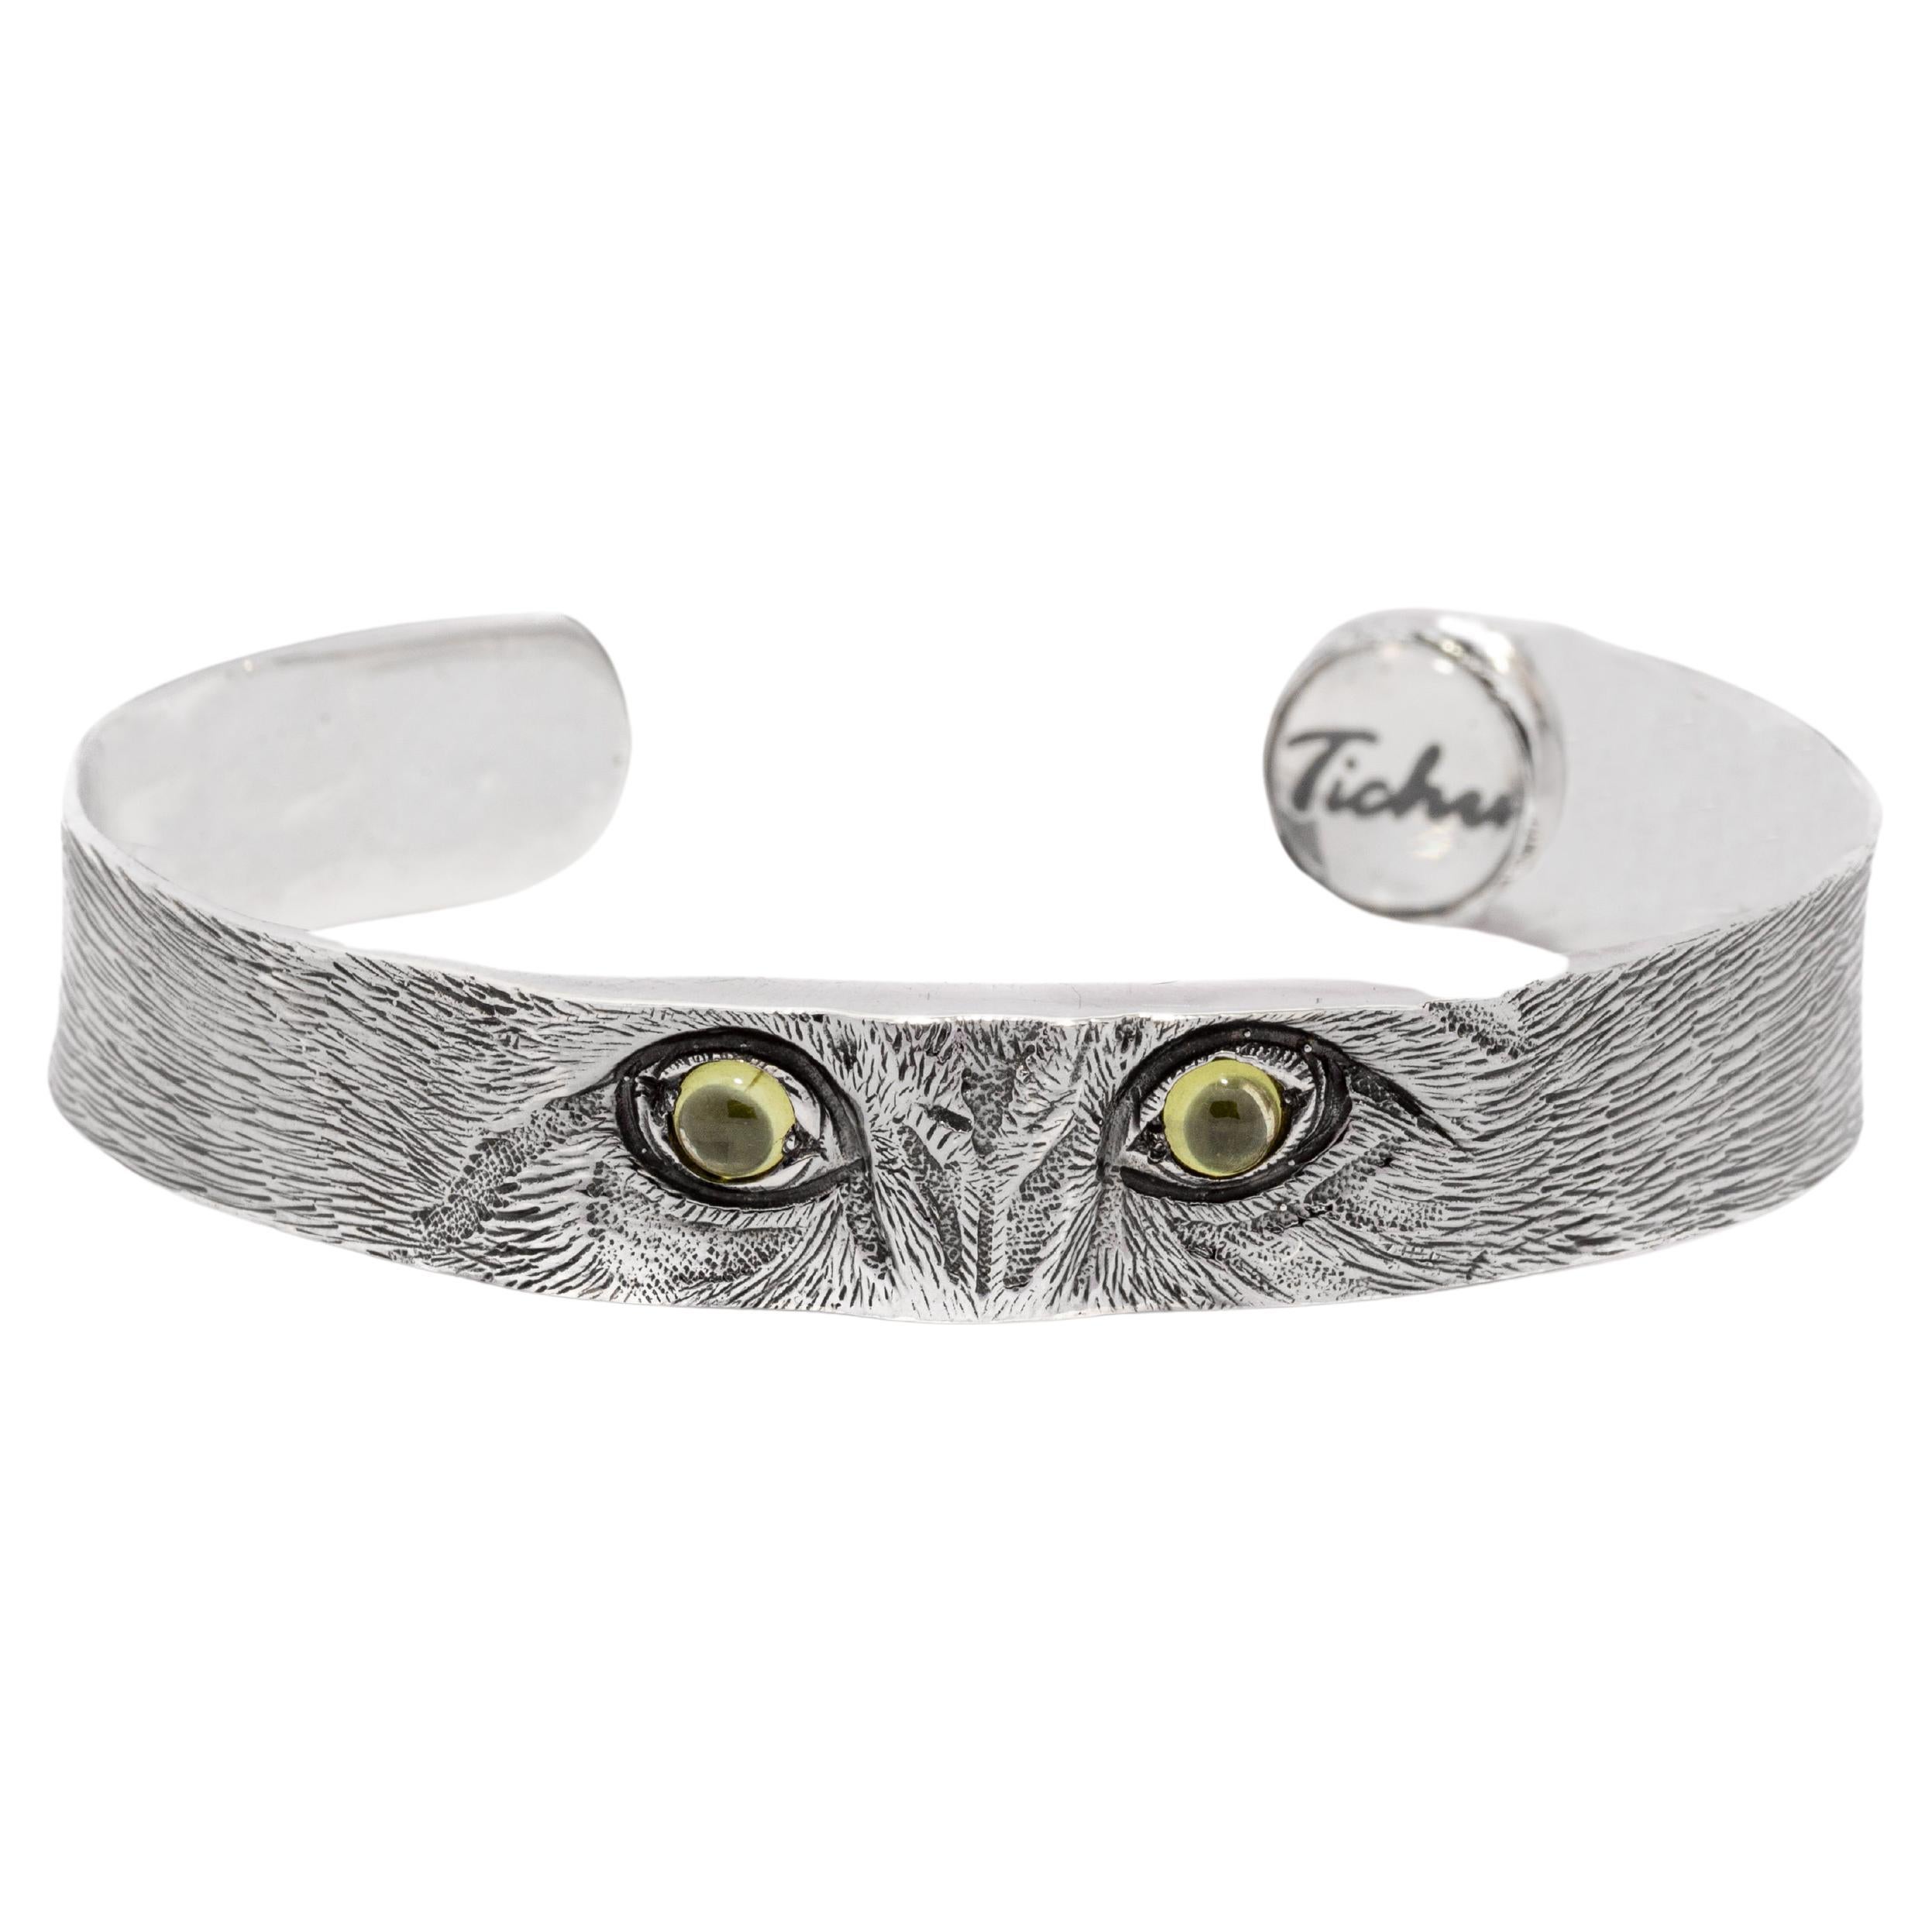 Tichu Peridot Cat Eyes Cuff in Sterling Silver and Crystal Quartz 'Size M' For Sale